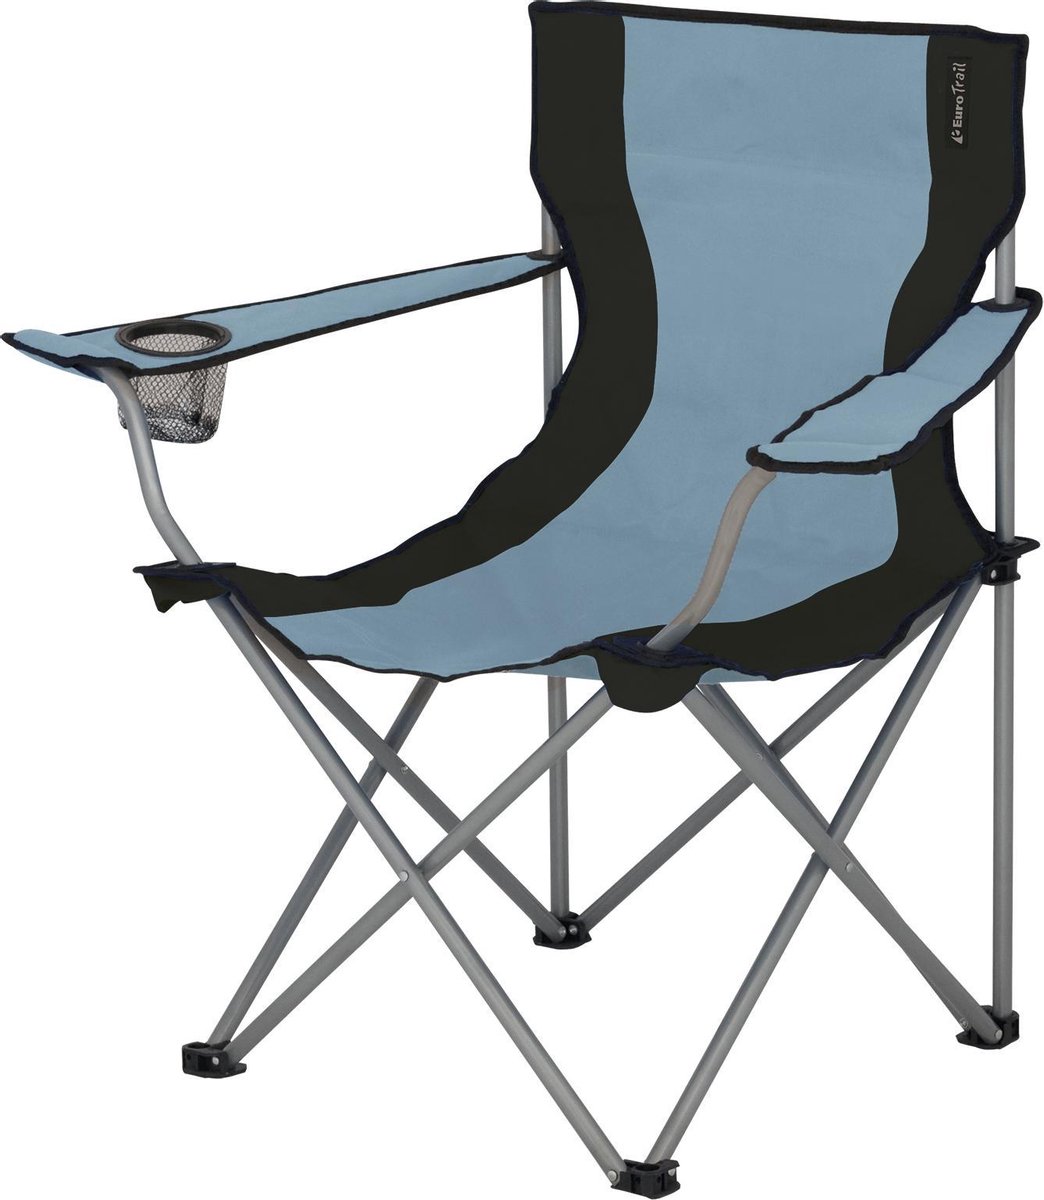 Eurotrail Campingstoel Lausanne 80 Cm Polyester/staal - Blauw